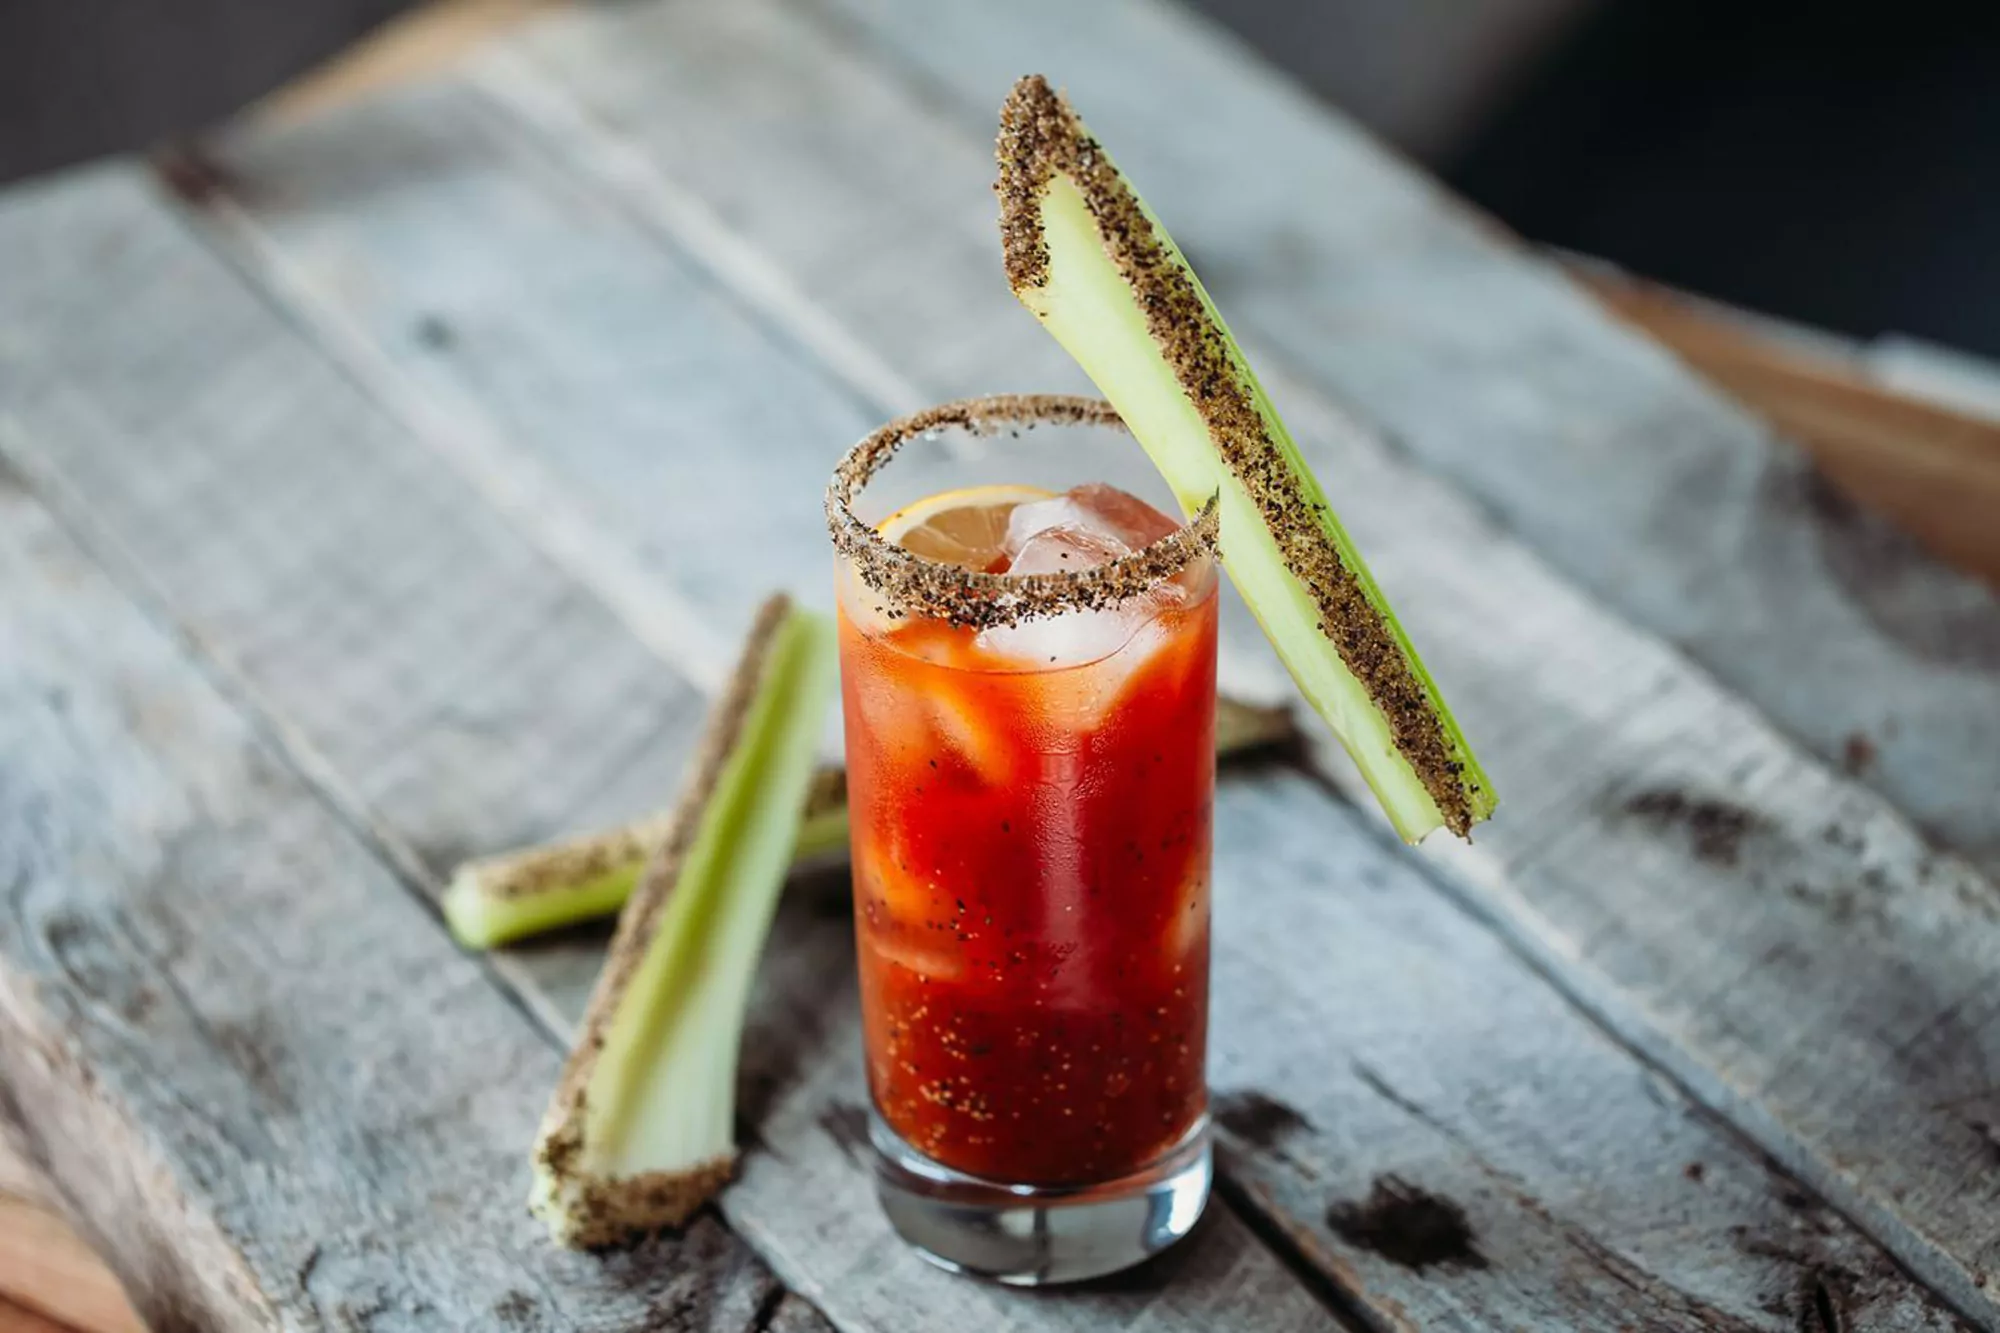 A bloody mary with celery sticks on a wooden table.